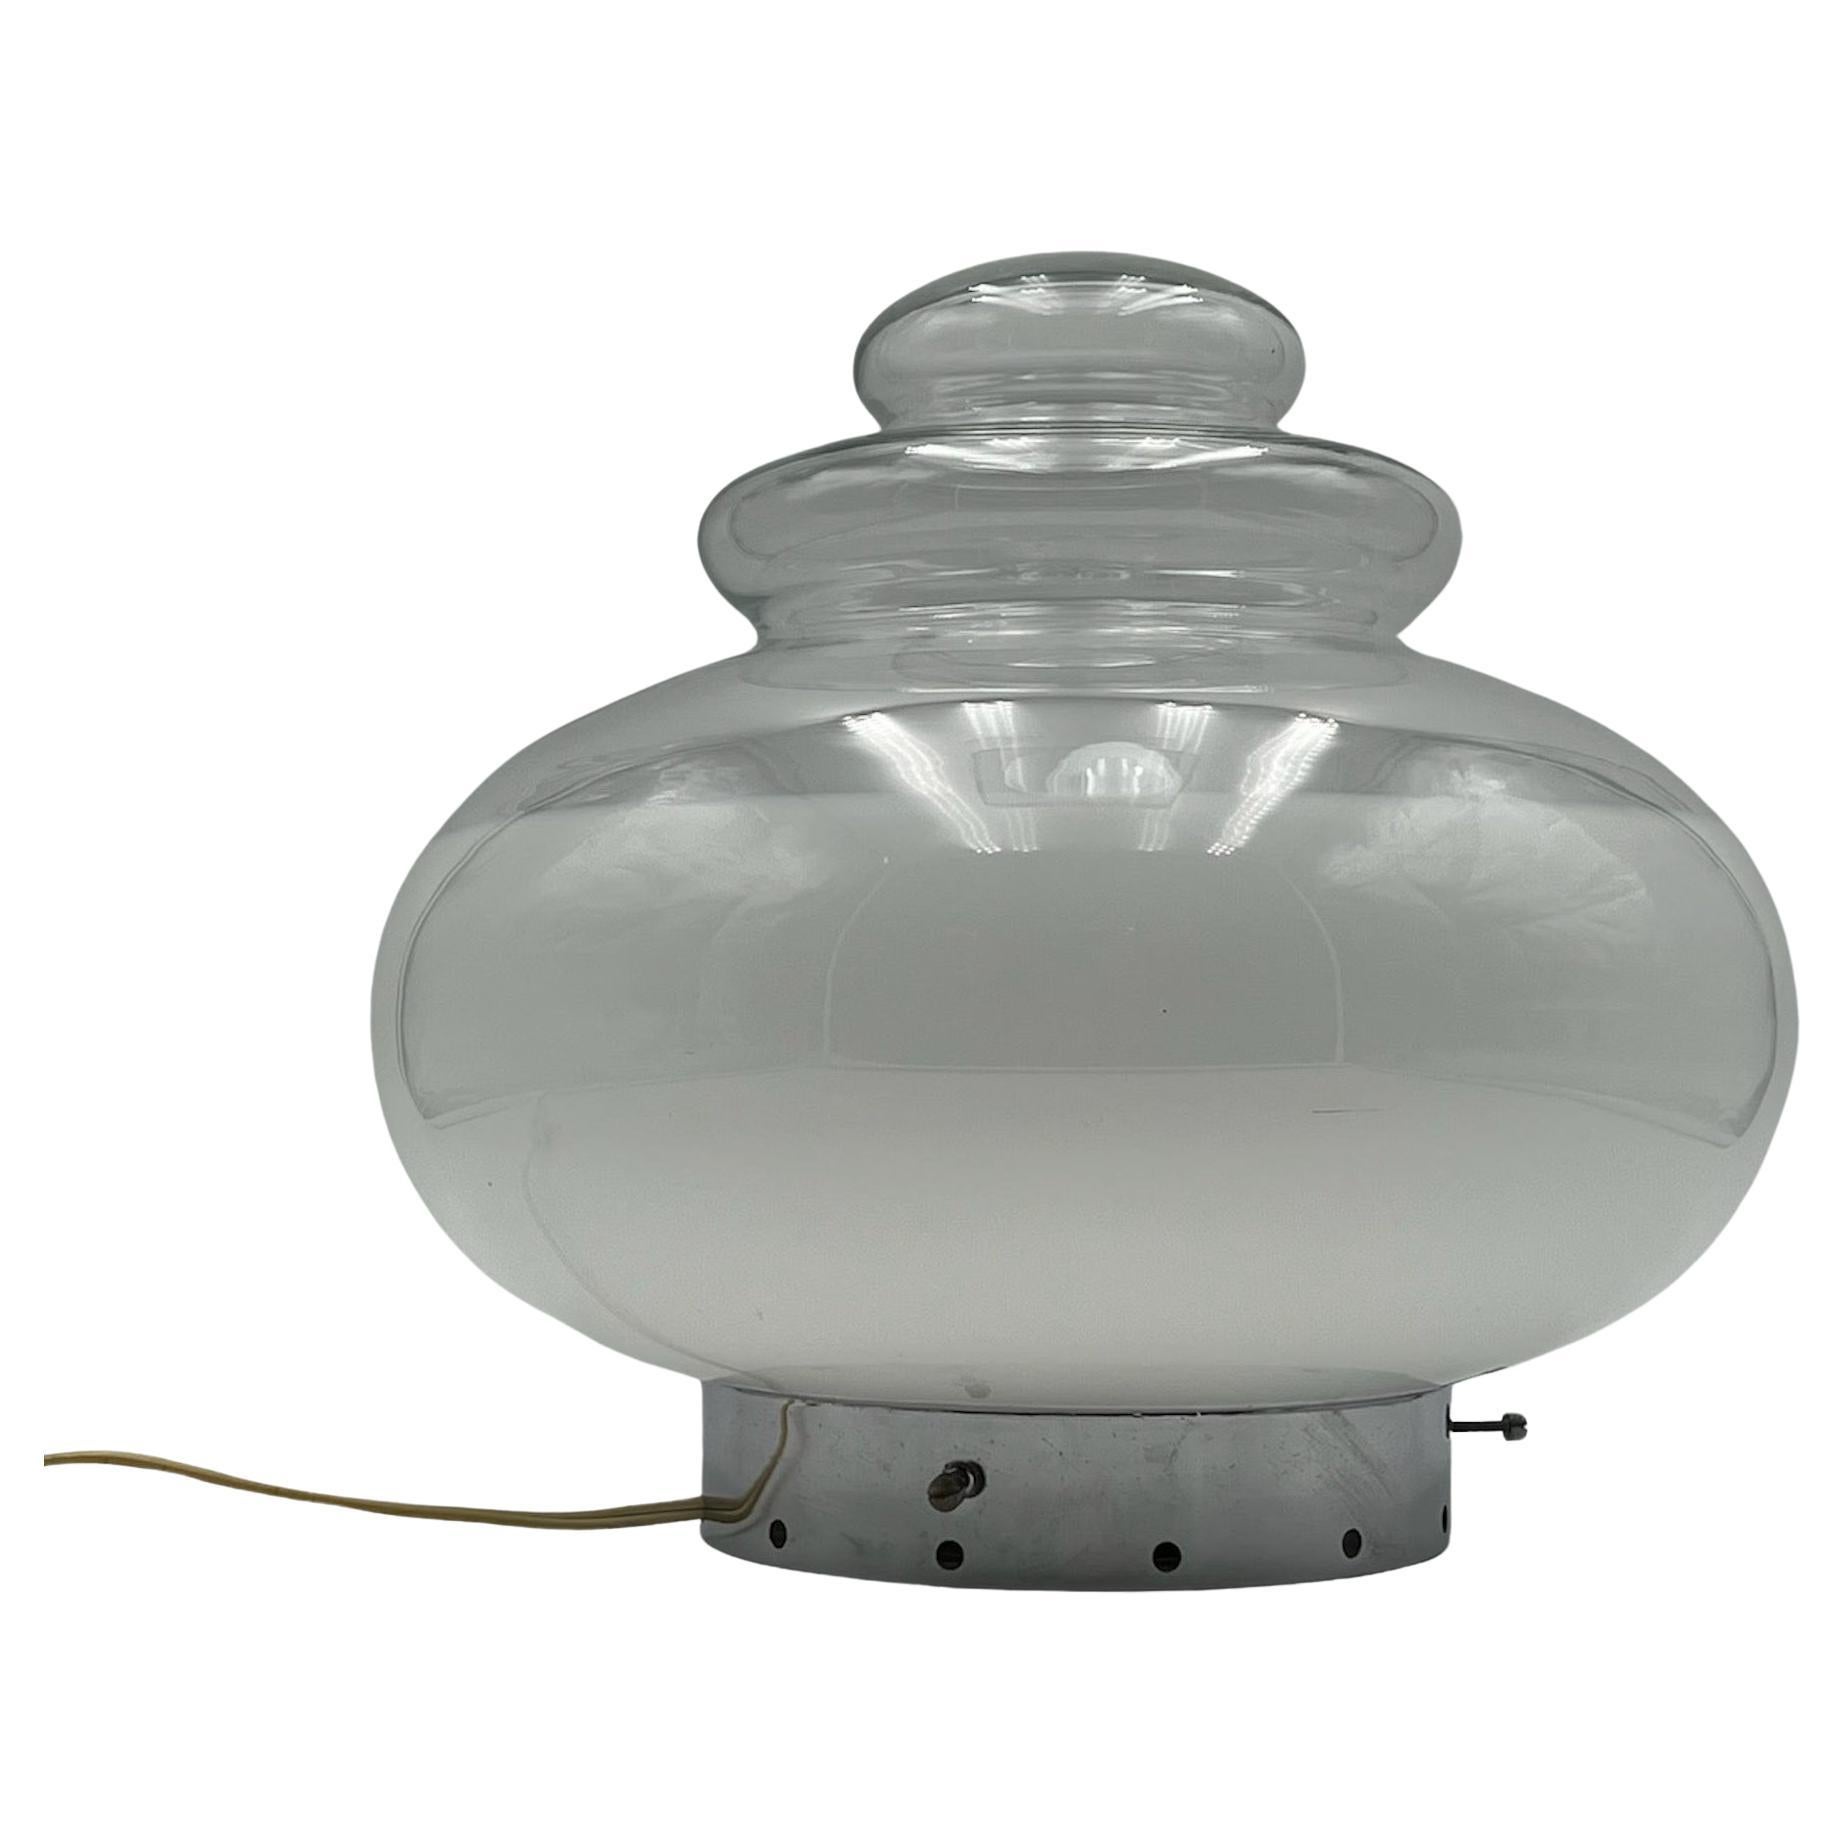 Large and impressive table lamp with the iconic 'flying saucer' shape typical of late 60s / early 70s creations.

This lamp is made of a perfectly crafted base made of chromed metal with authentic bolts. The big lampshade made of glass with opaline